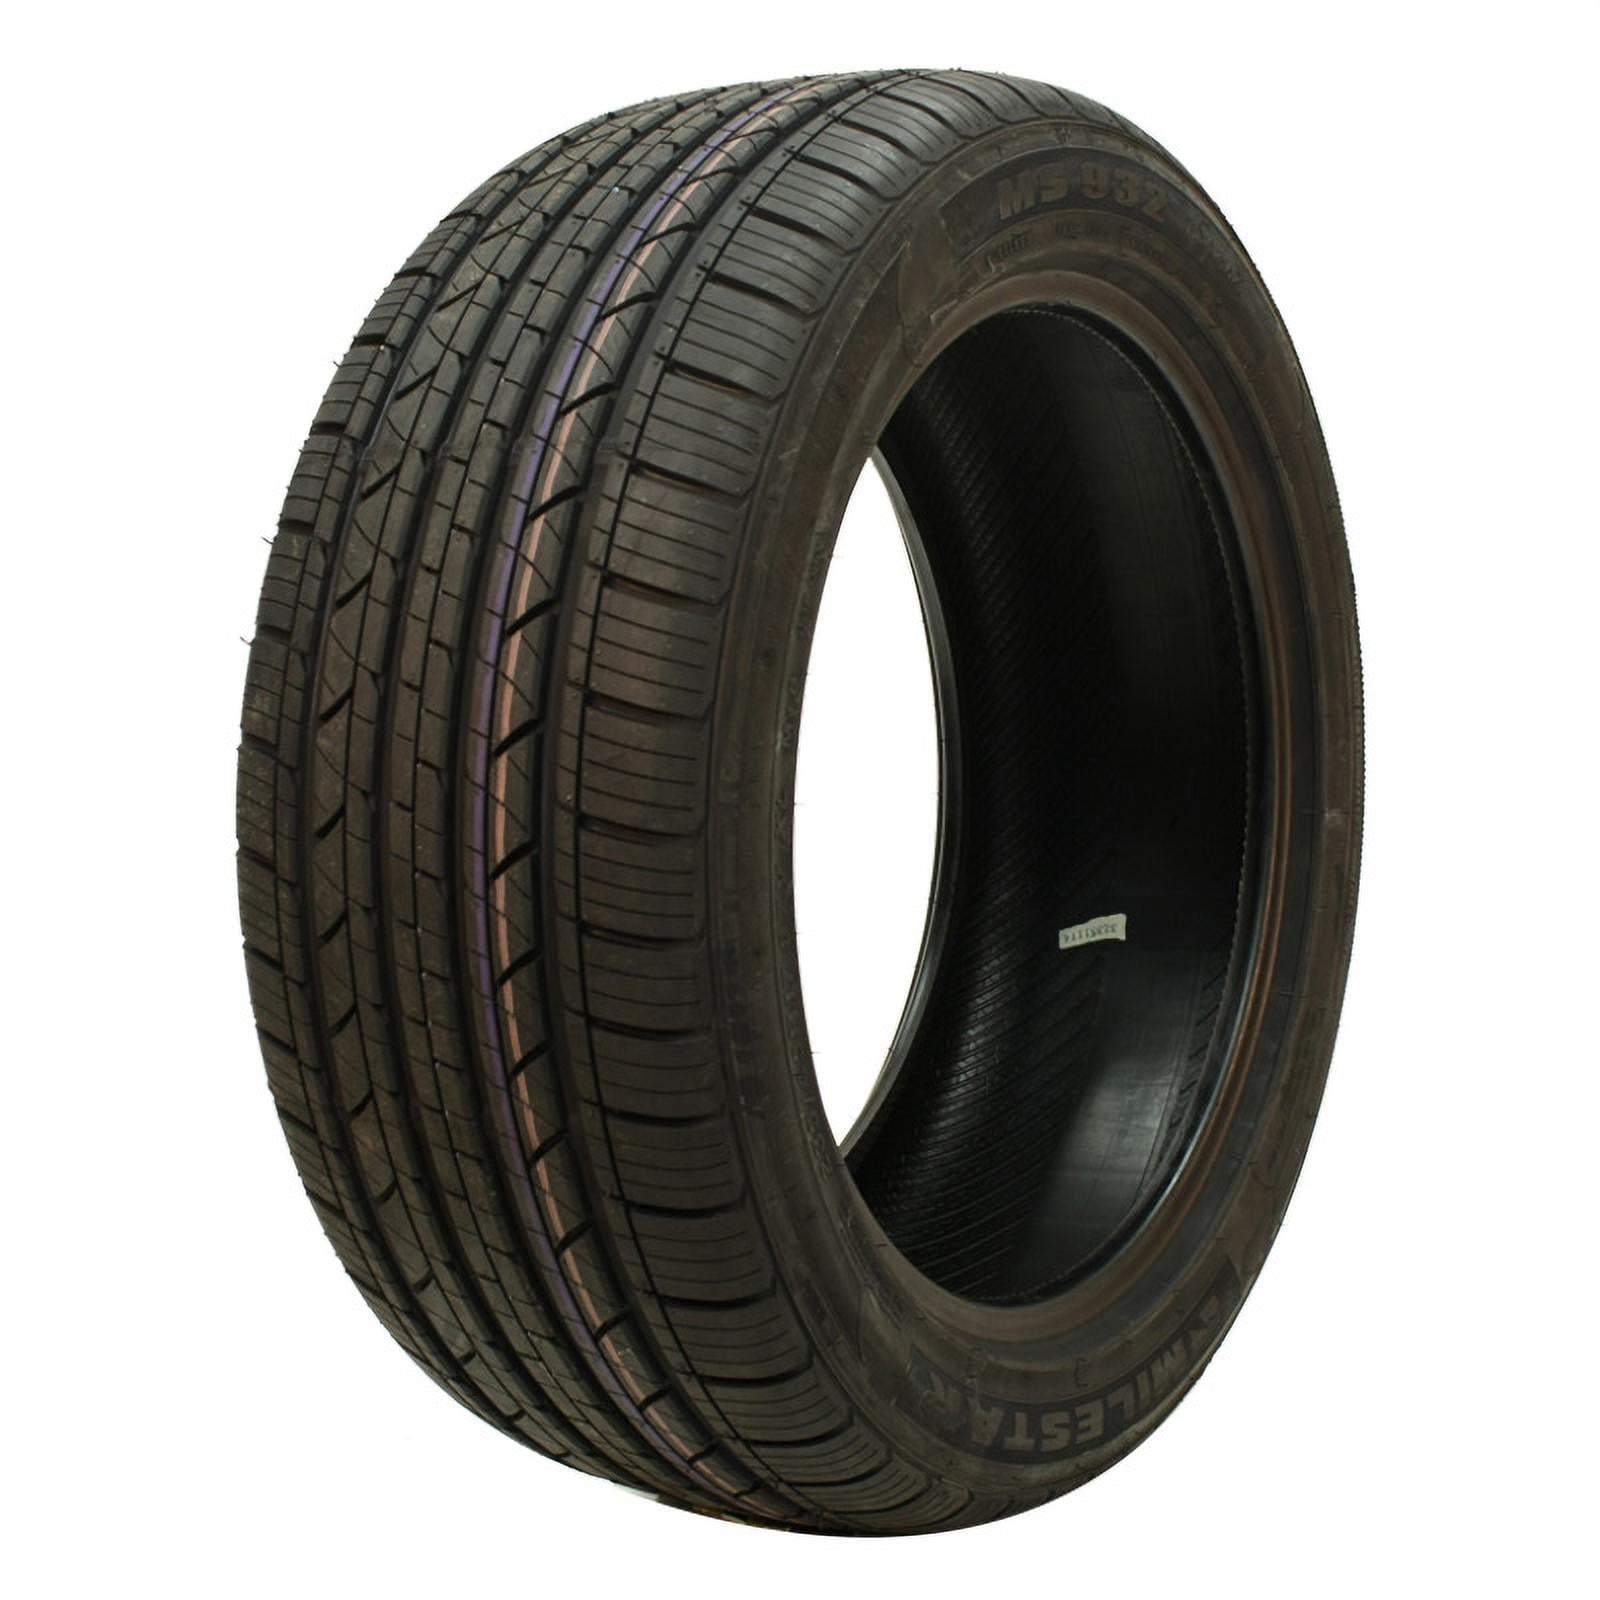 235/50R19 103V XL ACCELERA SUV 4x4 TYRES 235 50 19 EXTRA LOAD 2 x tyres